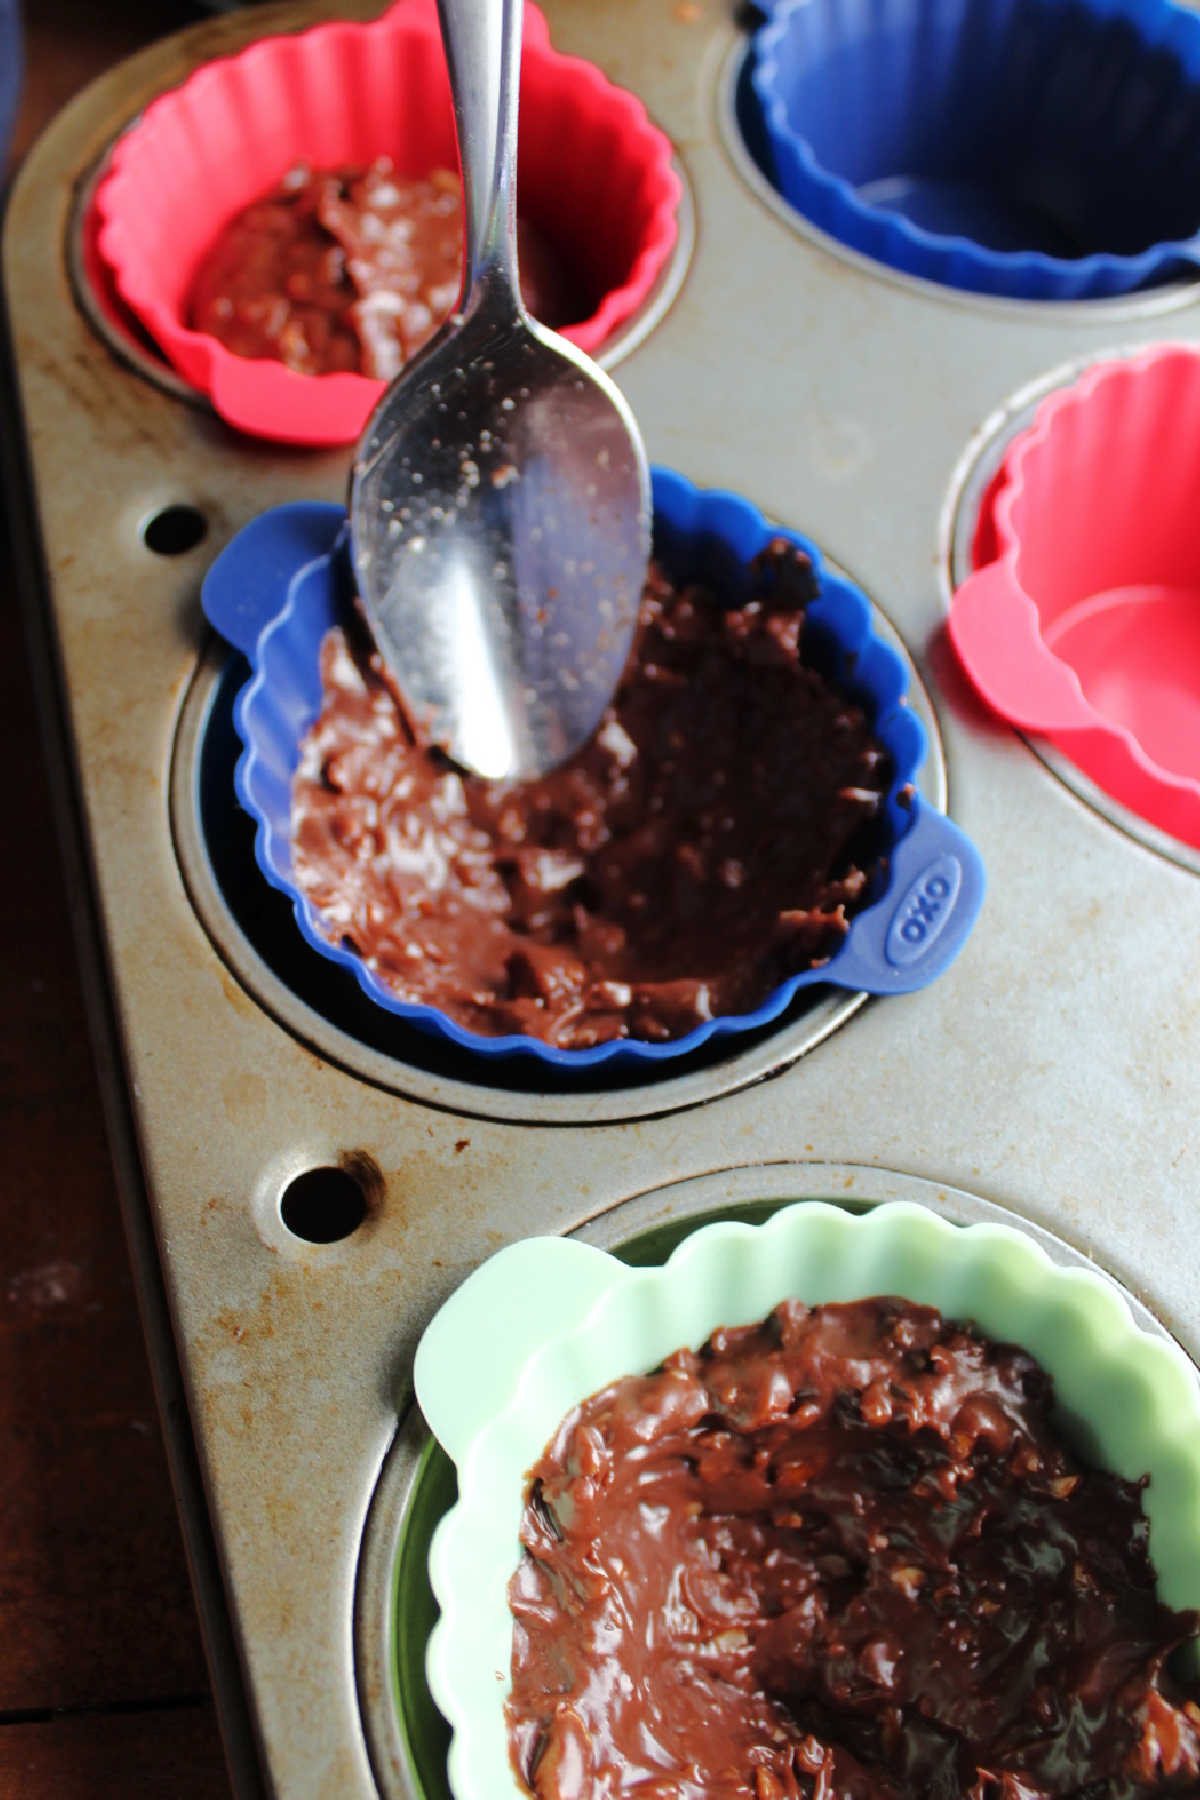 Using a spoon to form the chocolate mixture into a cup.